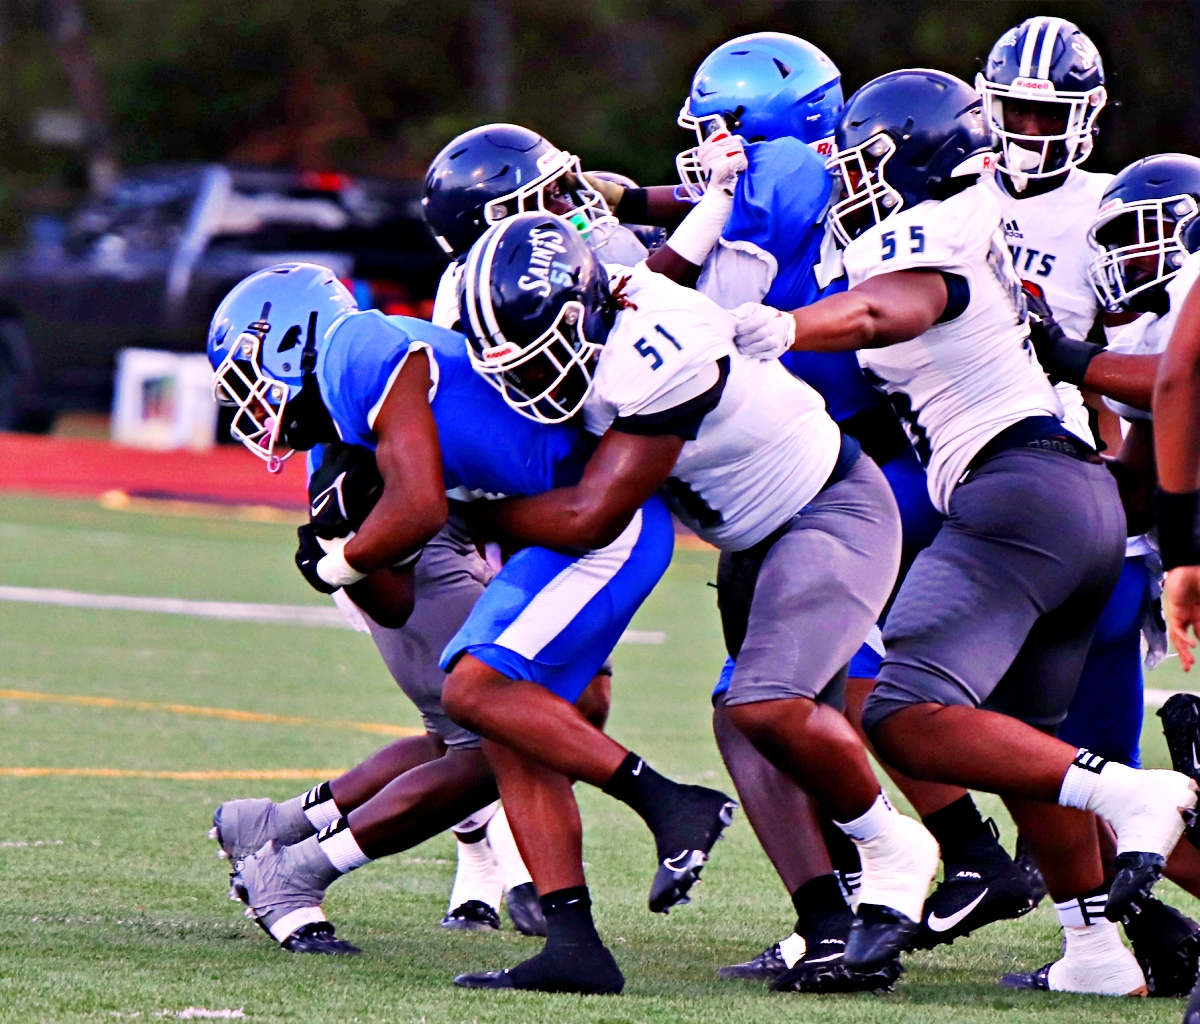 Stephenson's Devin Ingram (with ball) tries to get away from Cedar Grove's Chase Kerns (51) during preseason scrimmage action. (Photo by Mark Brock)